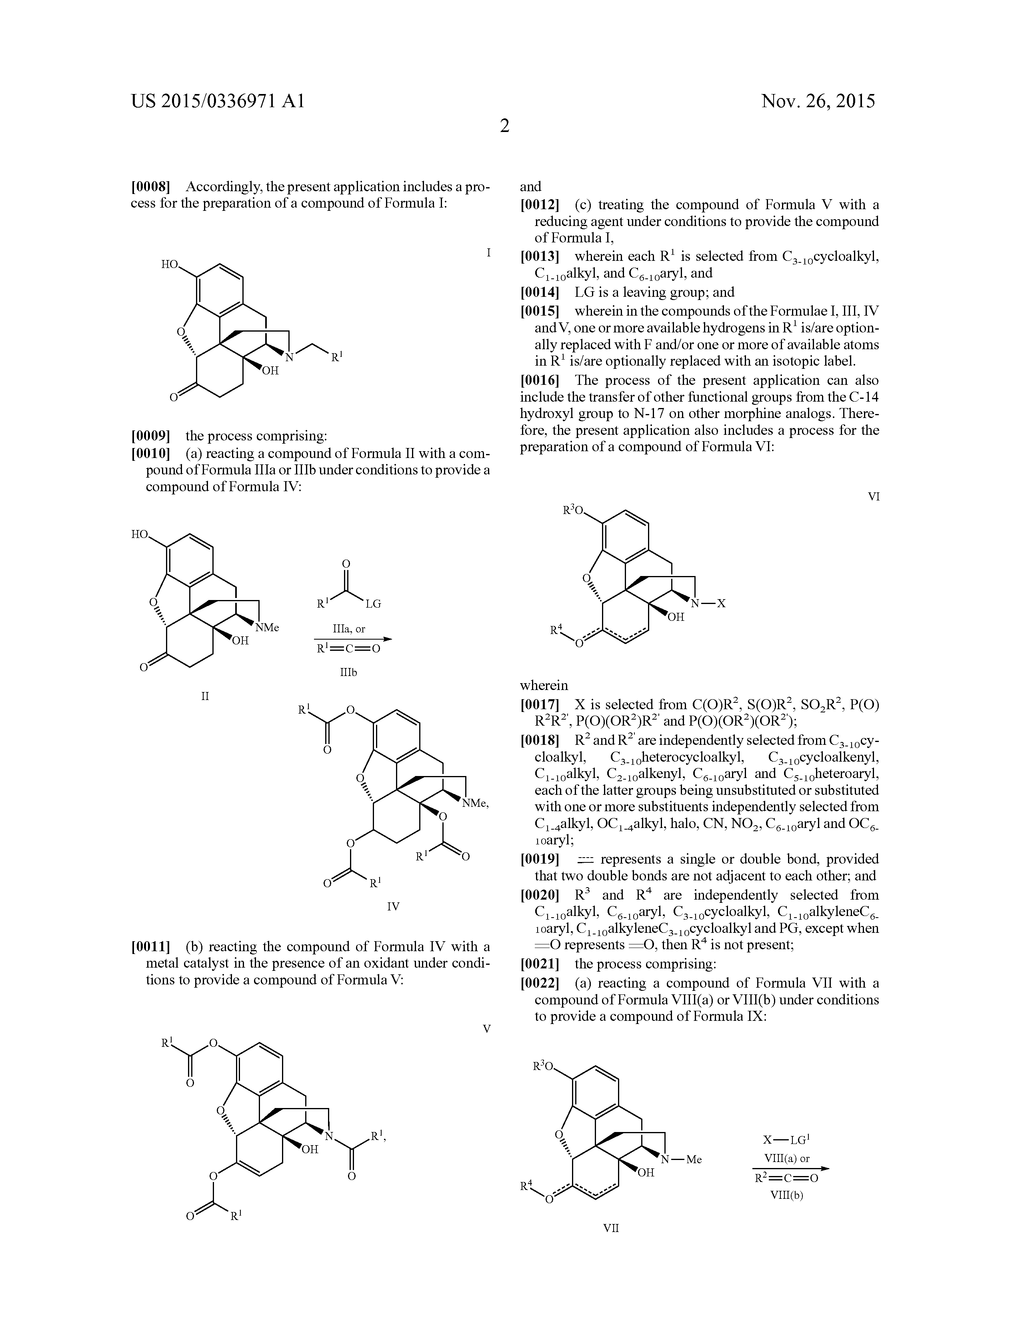 PROCESS FOR THE PREPARATION OF MORPHINE ANALOGS VIA METAL CATALYZED     N-DEMETHYLATION/FUNCTIONALIZATION AND INTRAMOLECULAR GROUP TRANSFER - diagram, schematic, and image 03